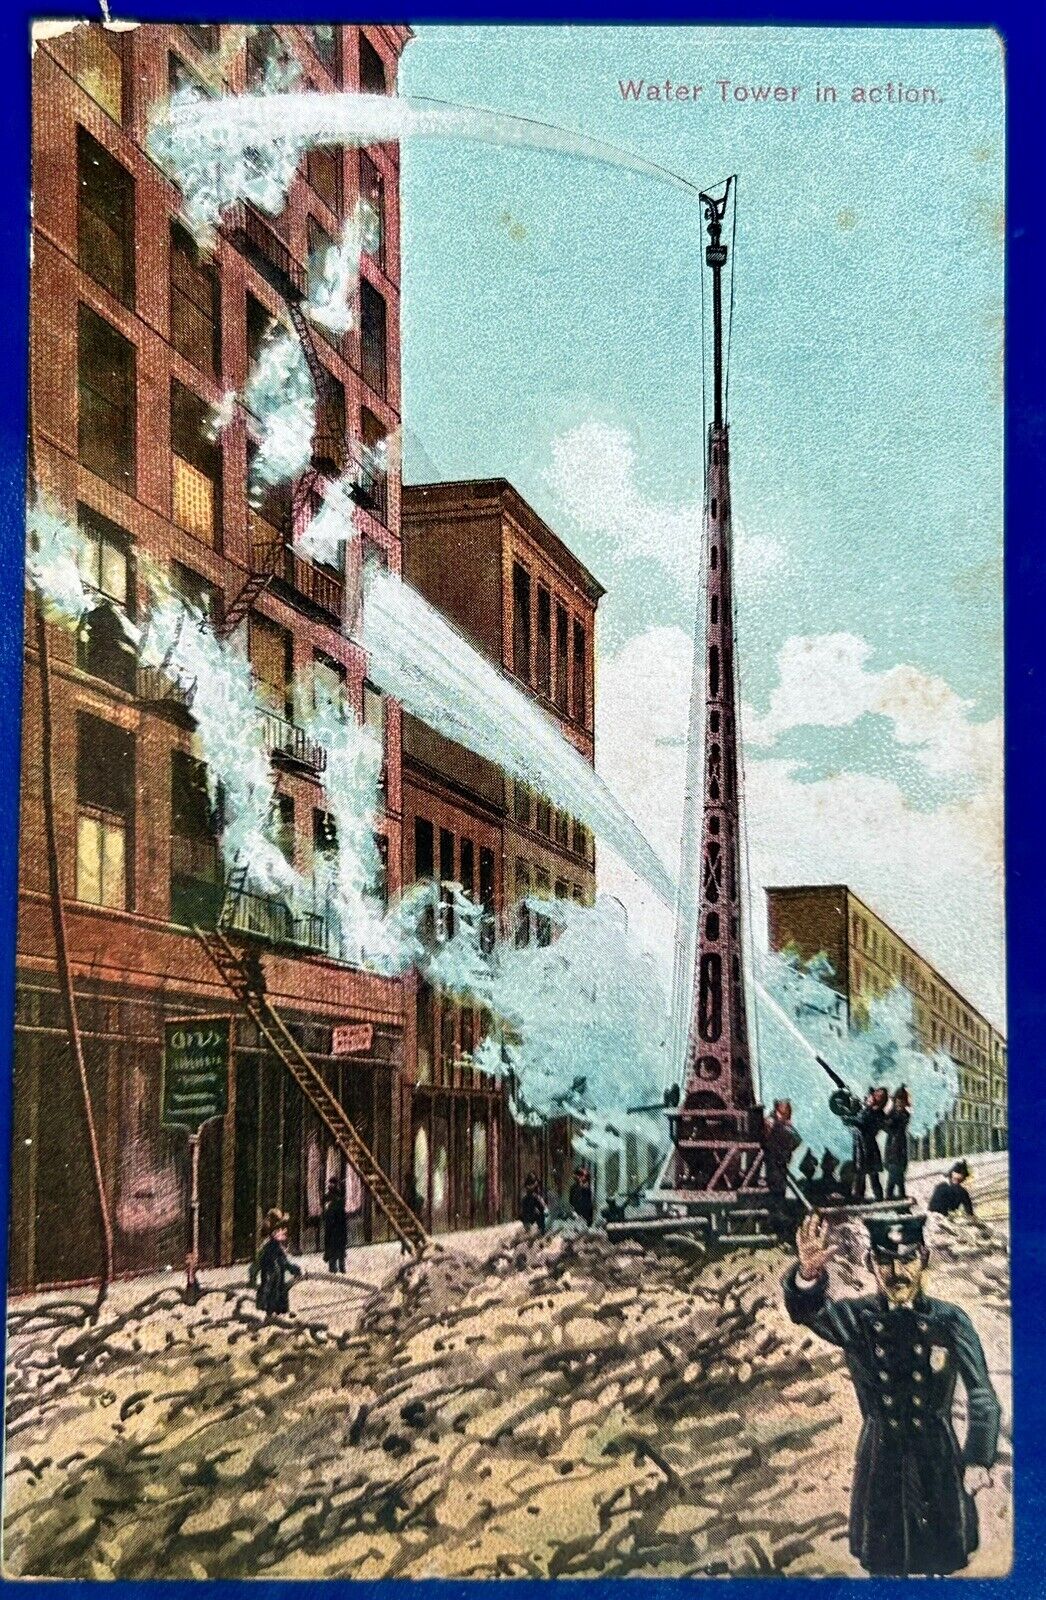 1908 What Tower In Action. New York Vintage Postcard Great Condition. Firemen